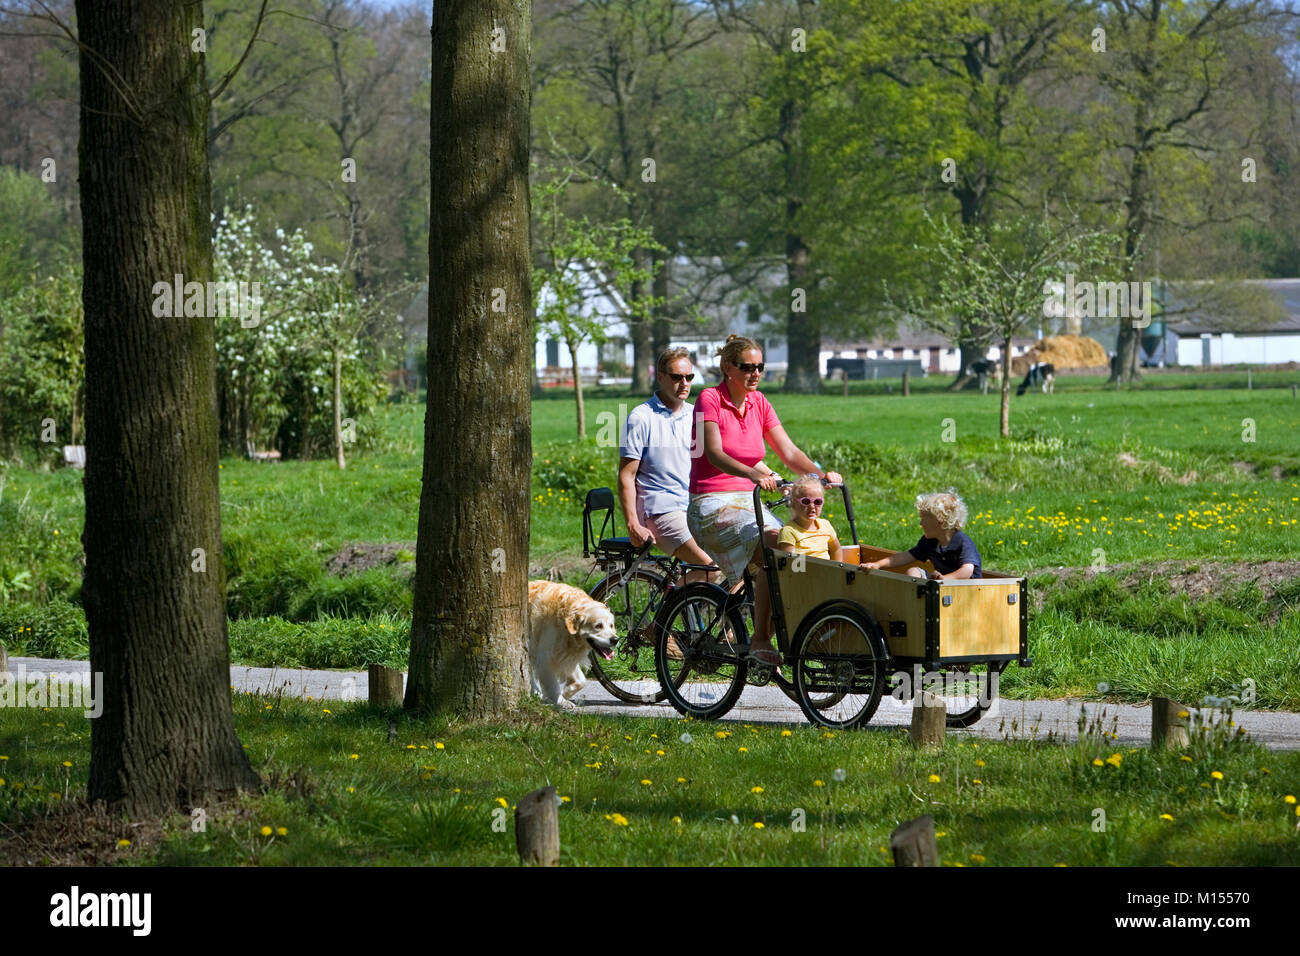 The Netherlands, 's-Graveland. Mother and 2 children on adapted bicycle. Father and Golden Retriever dog. Stock Photo